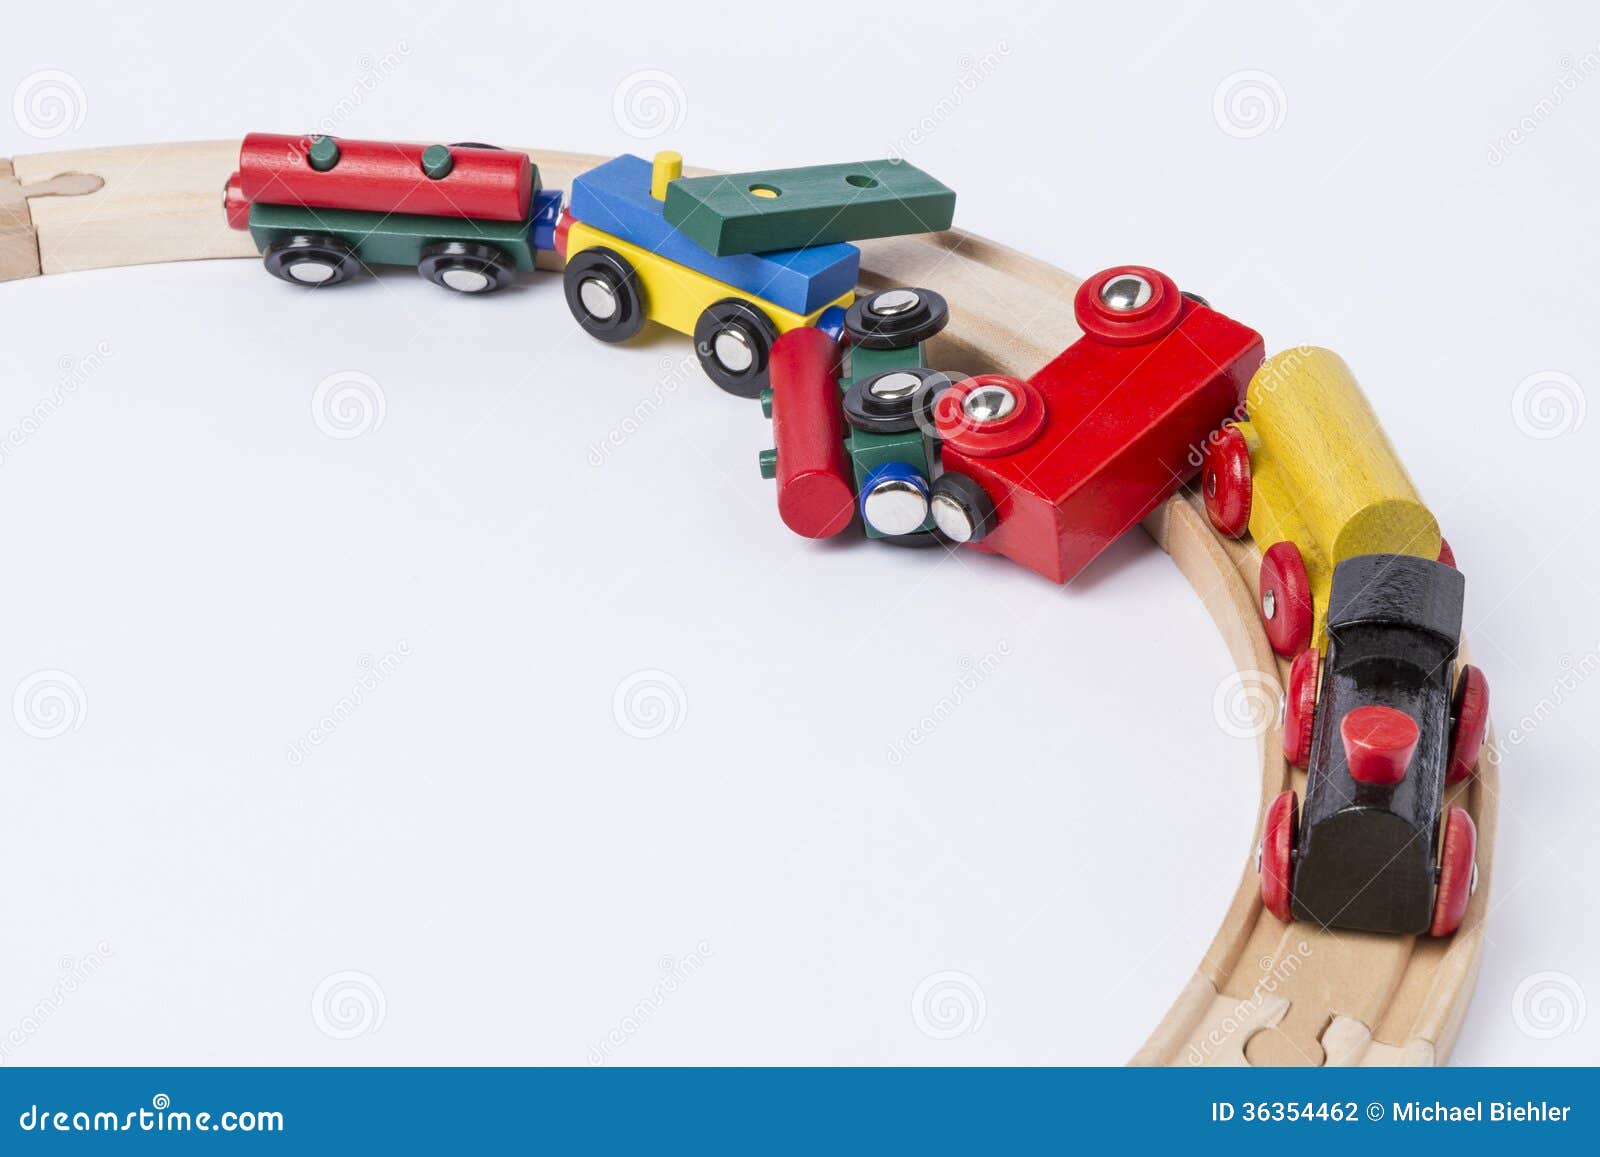 crashed-wooden-toy-train-derail-top-view-horizontal-image-36354462.jpg